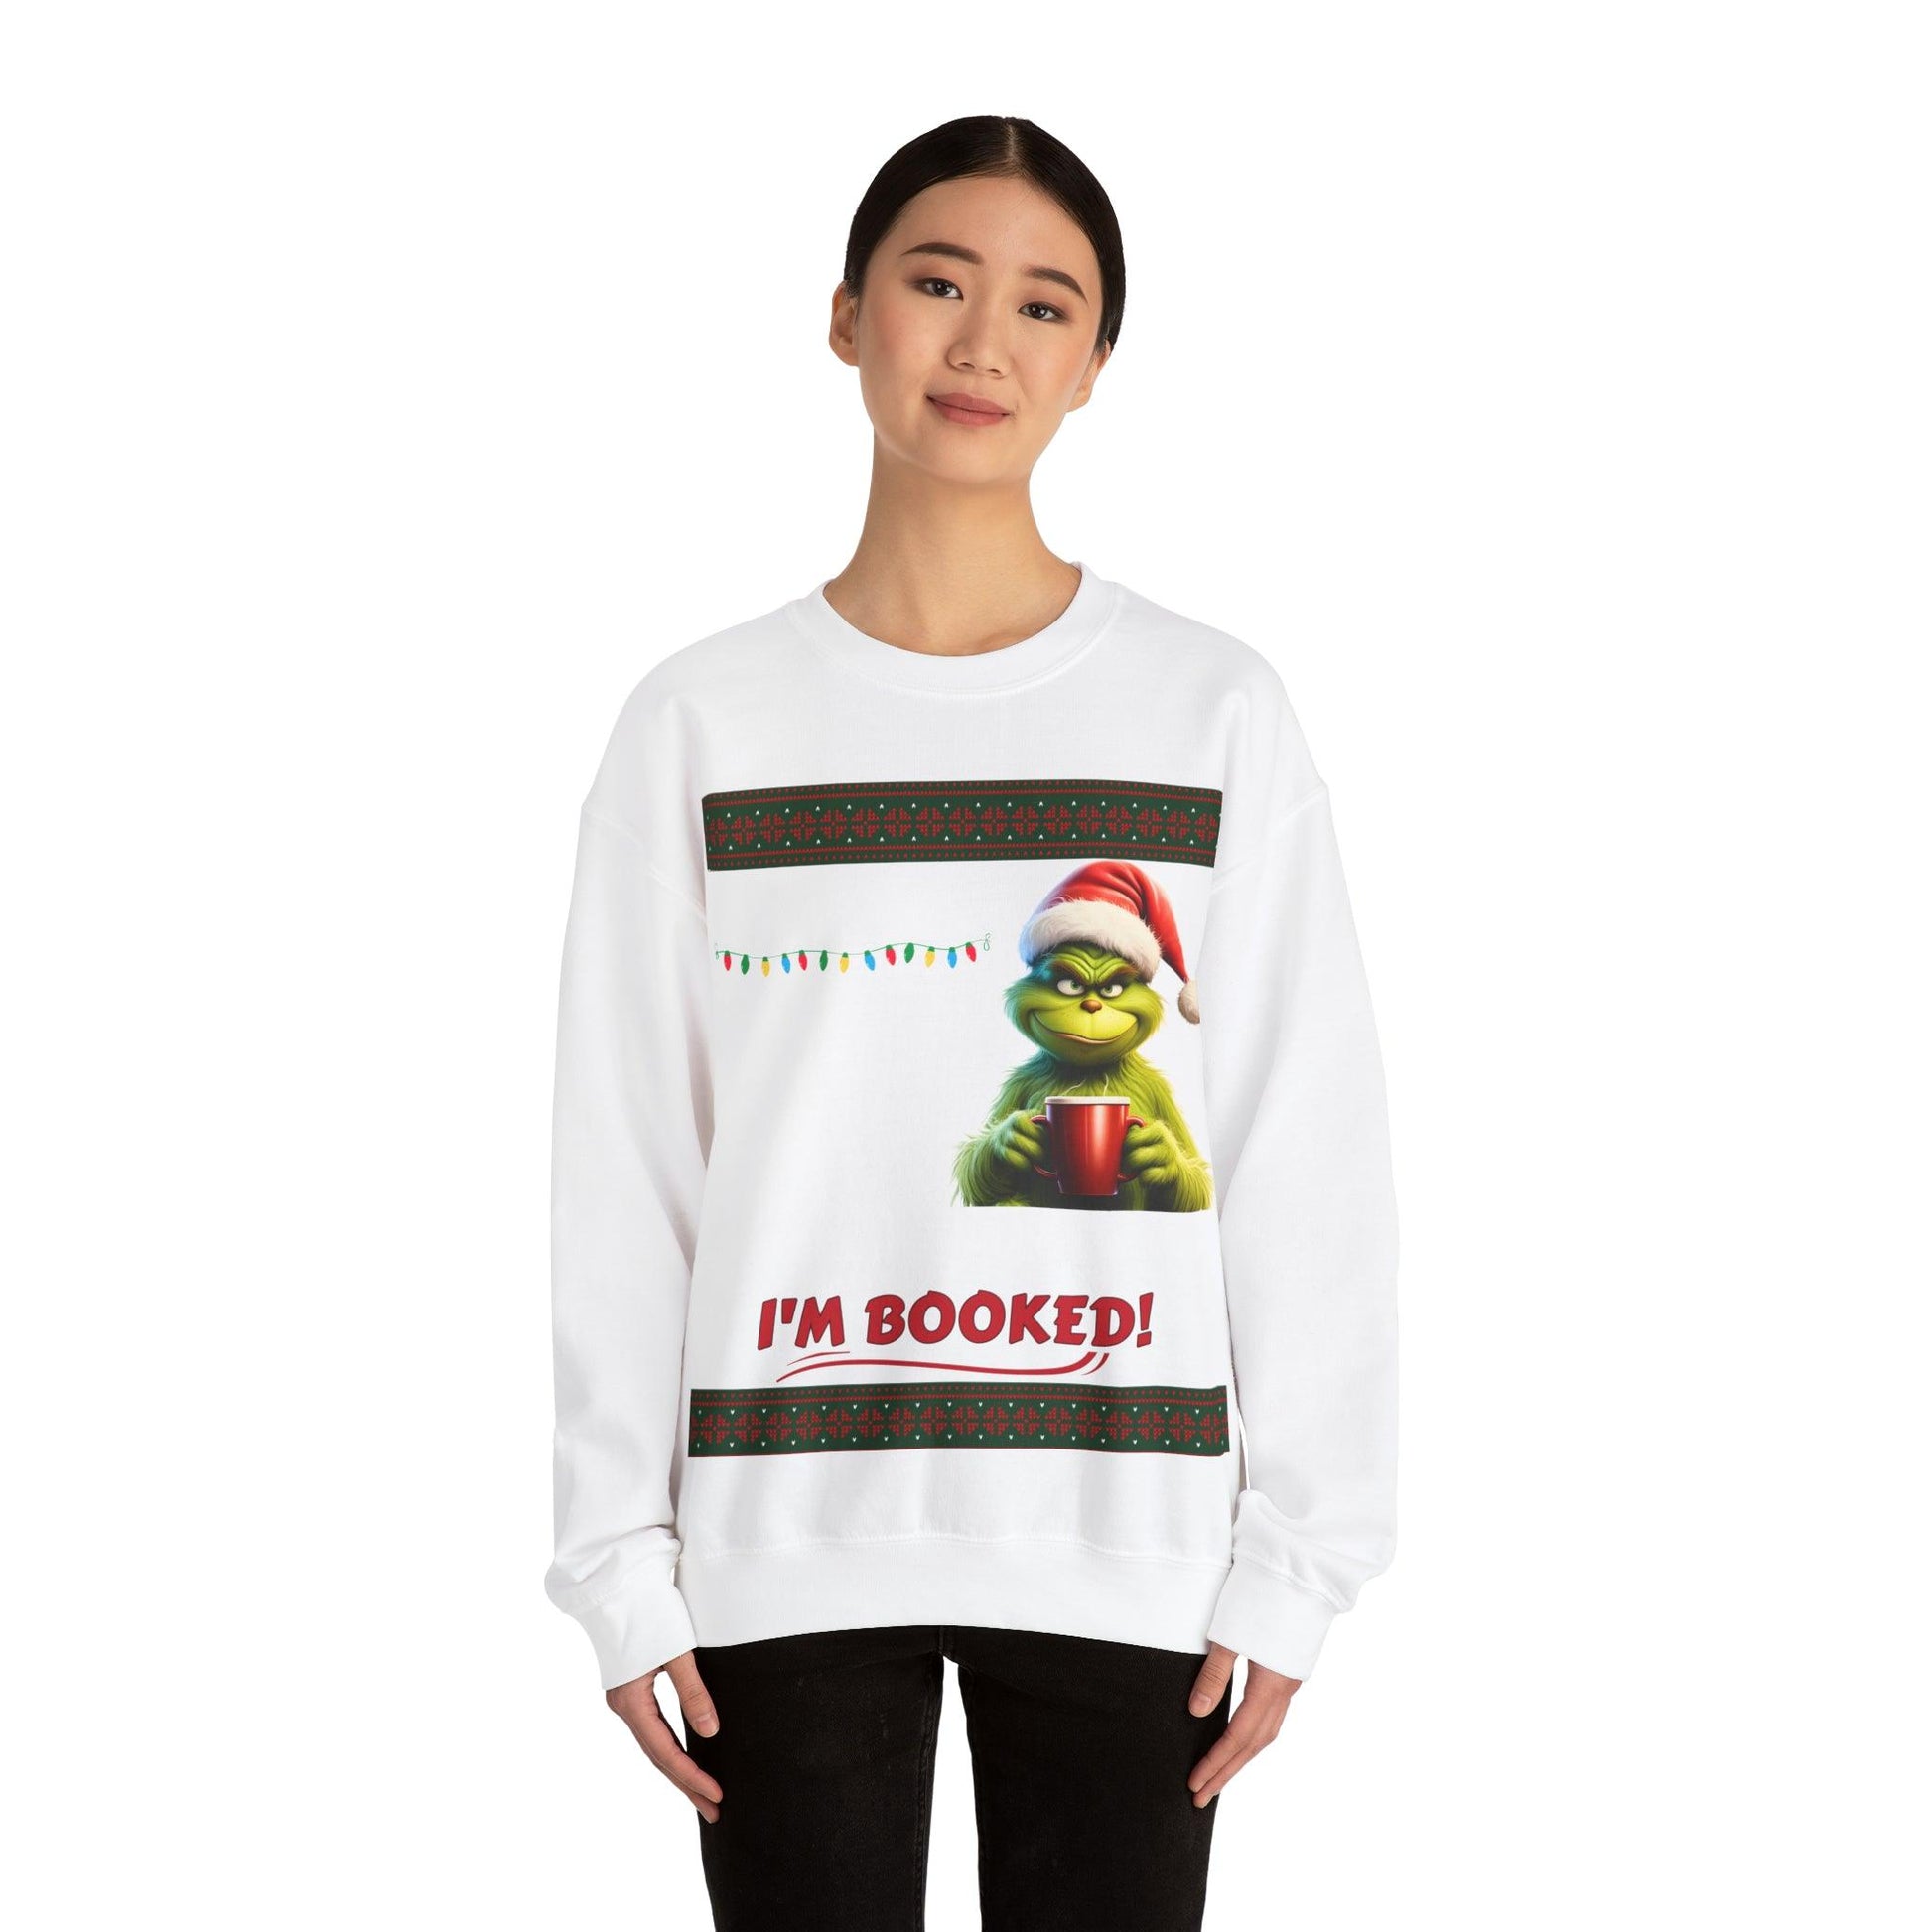 My Day Schedule I'M Booked Grinch Shirt Funny Christmas Sweatshirt Christmas grinch Sweatshirt Christmas Sweater Christmas Trendy Christmas Sweatshirt - Giftsmojo